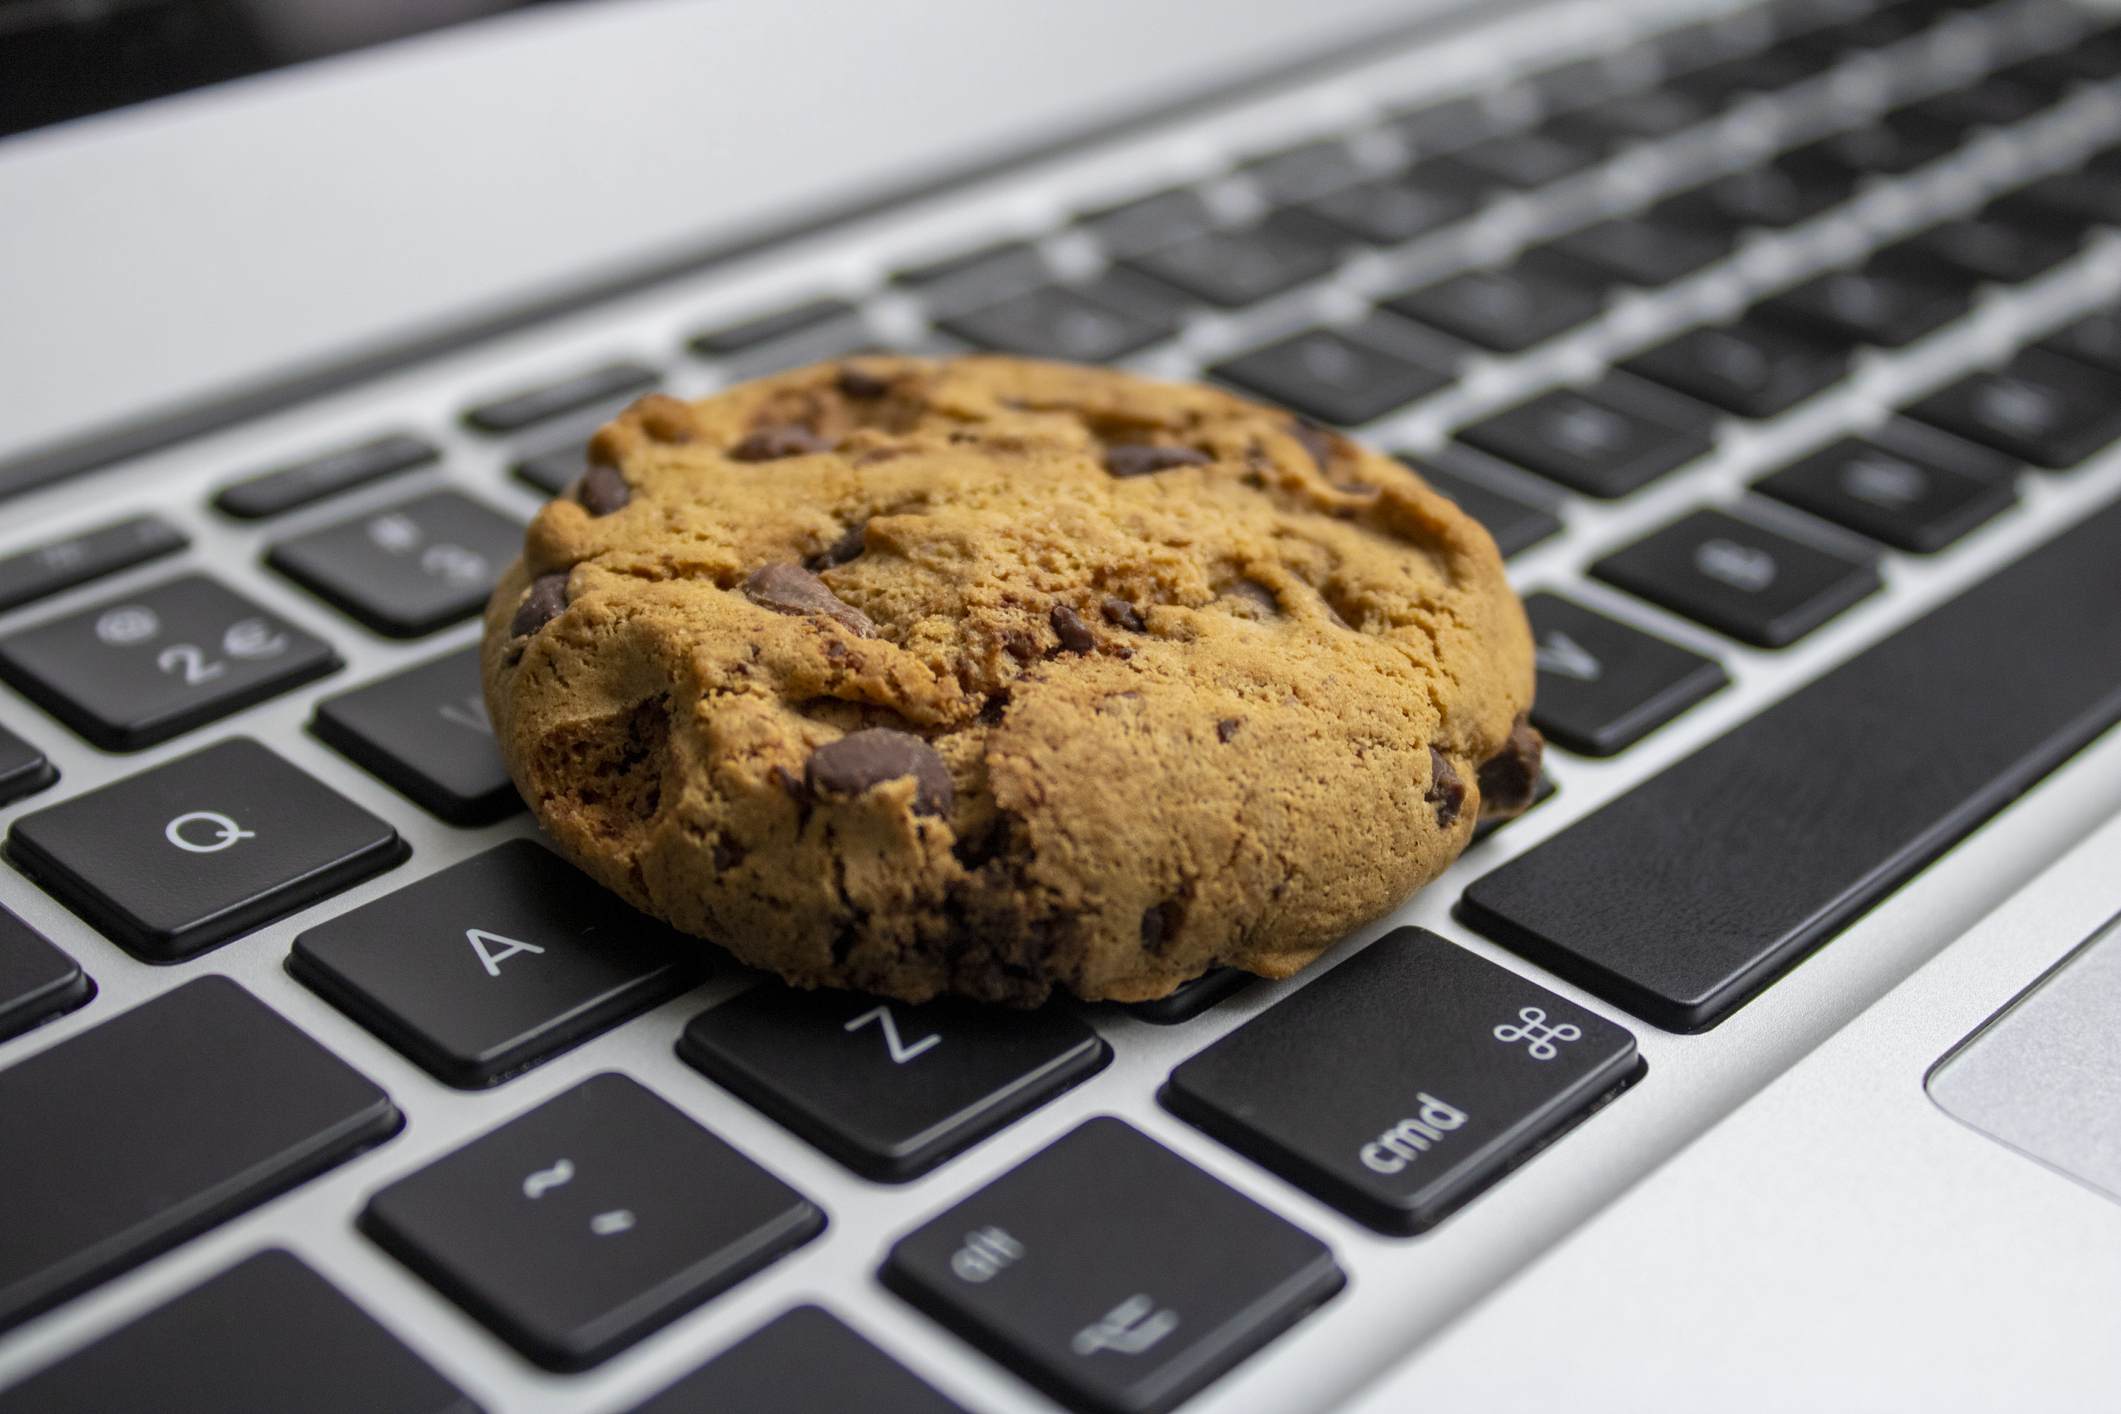 Cookie on the keyboard image